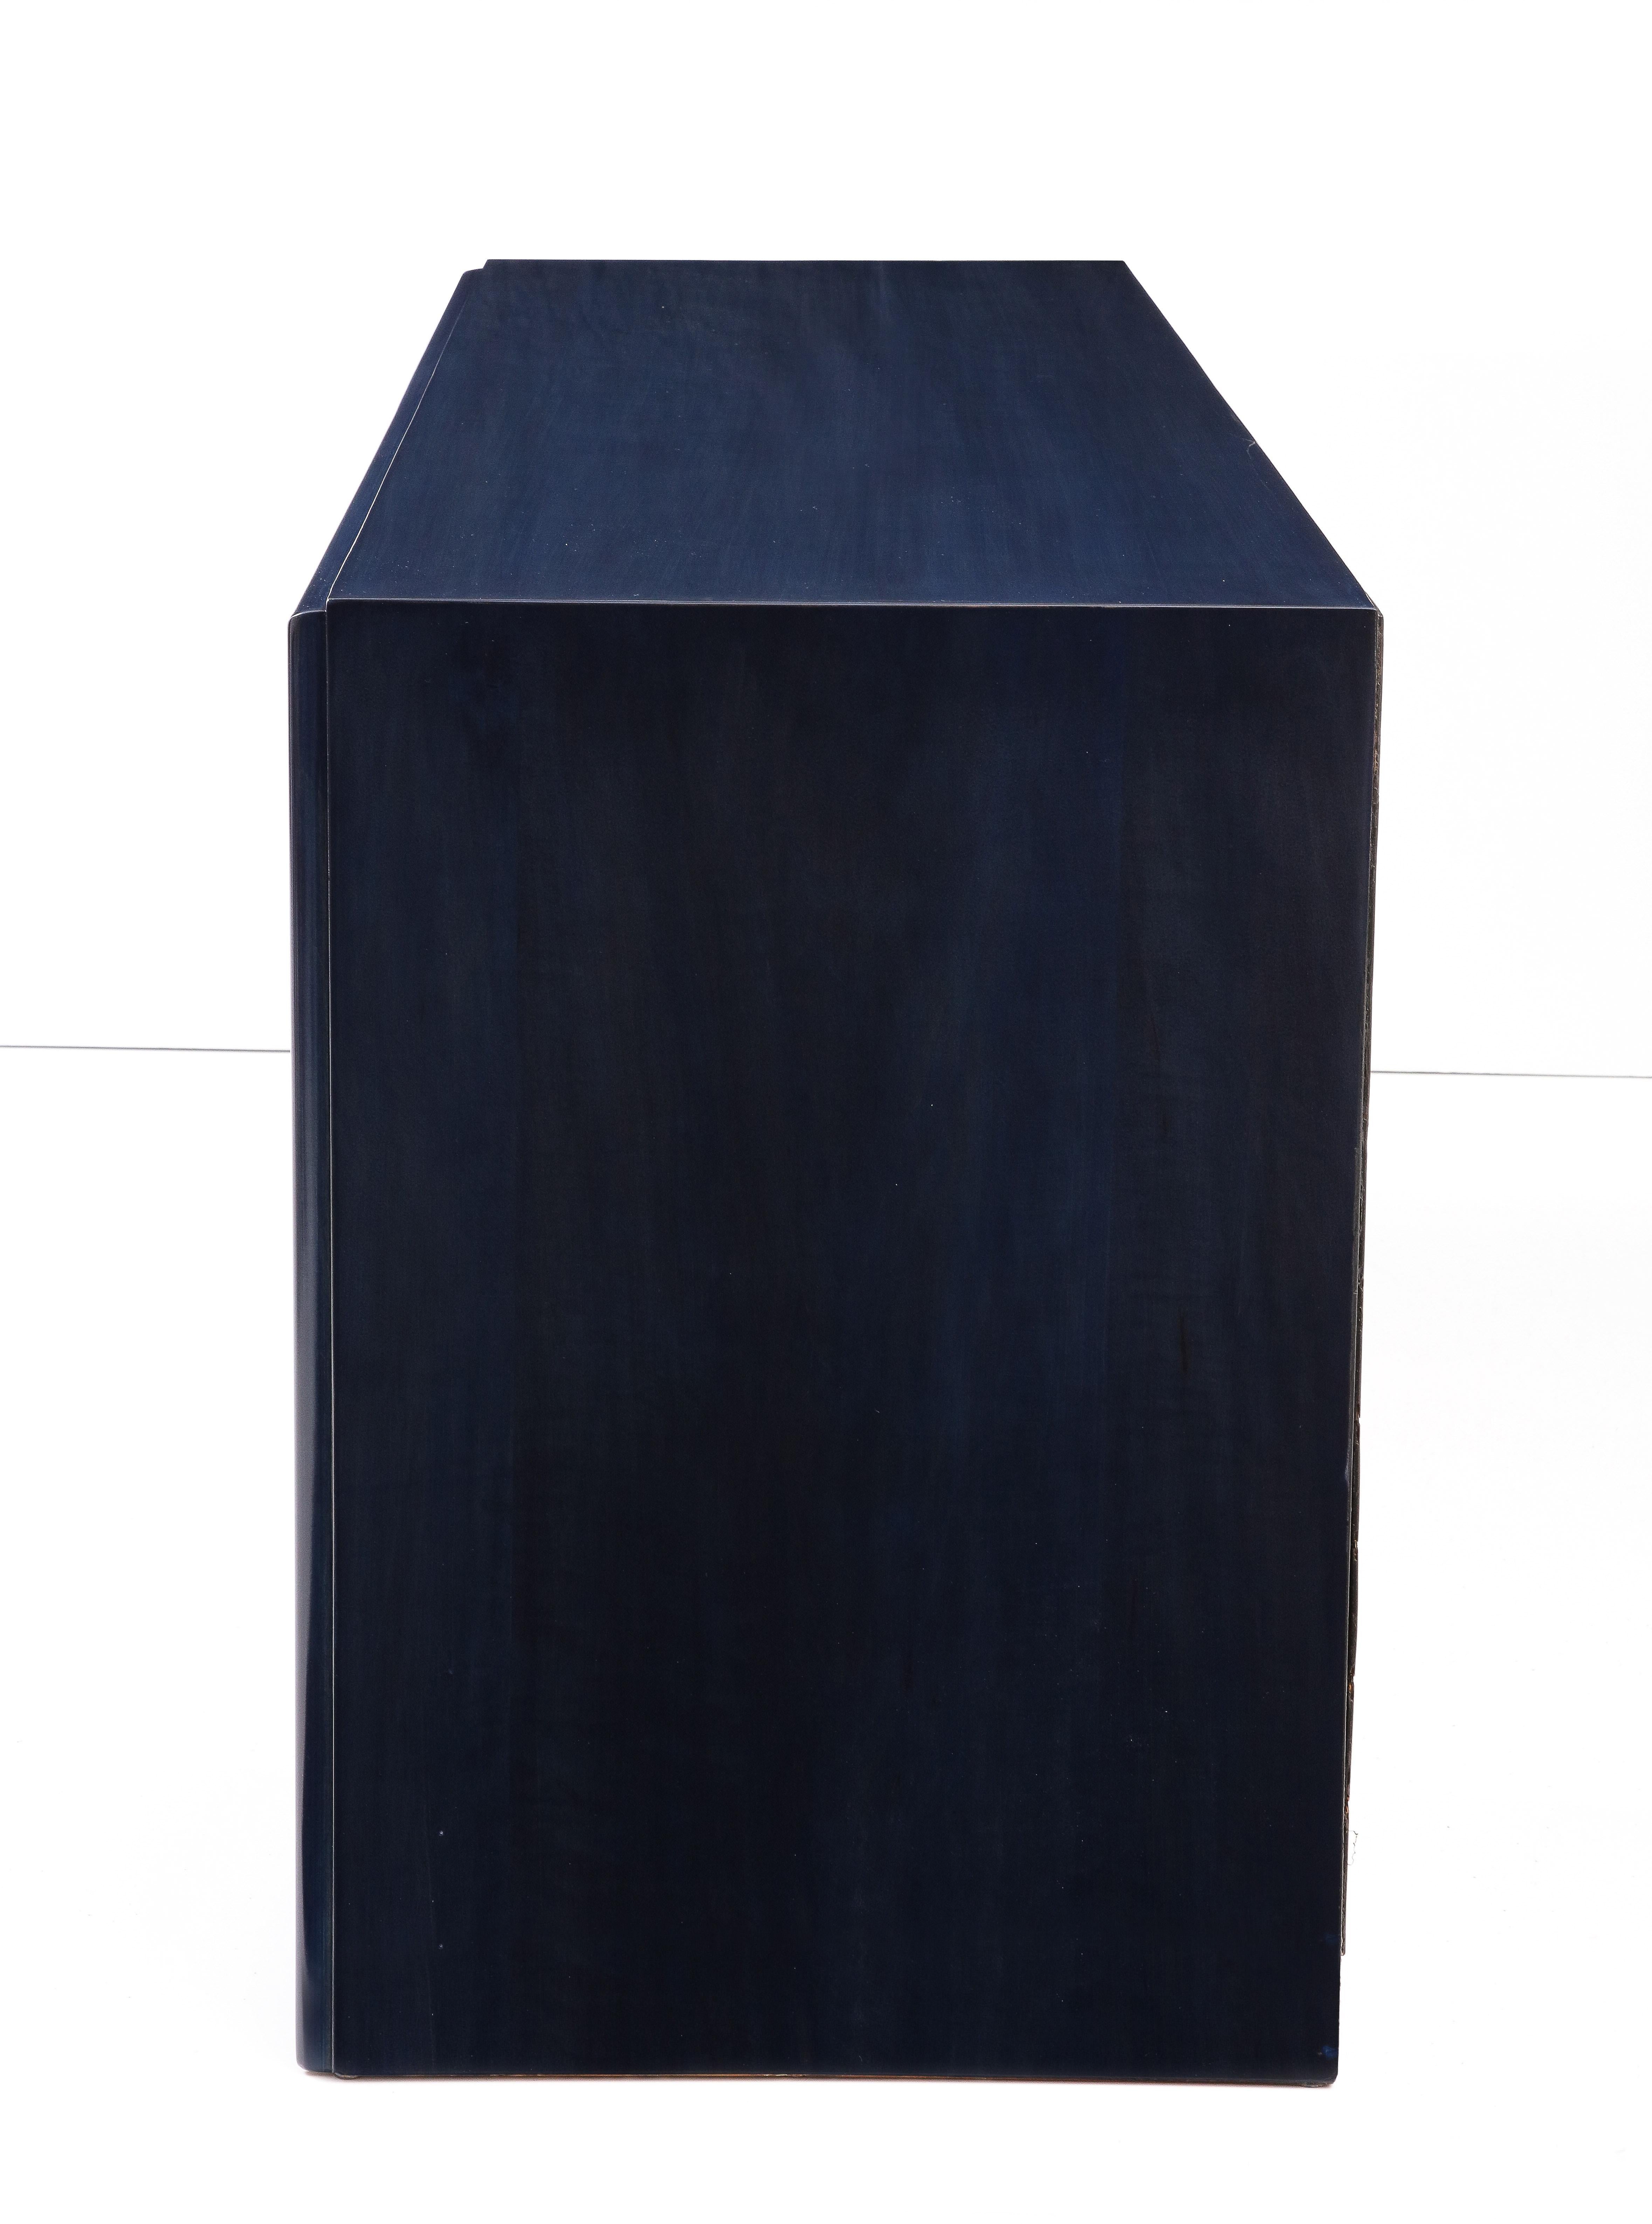 American Paul Frankl Midnight Blue Stained Dresser